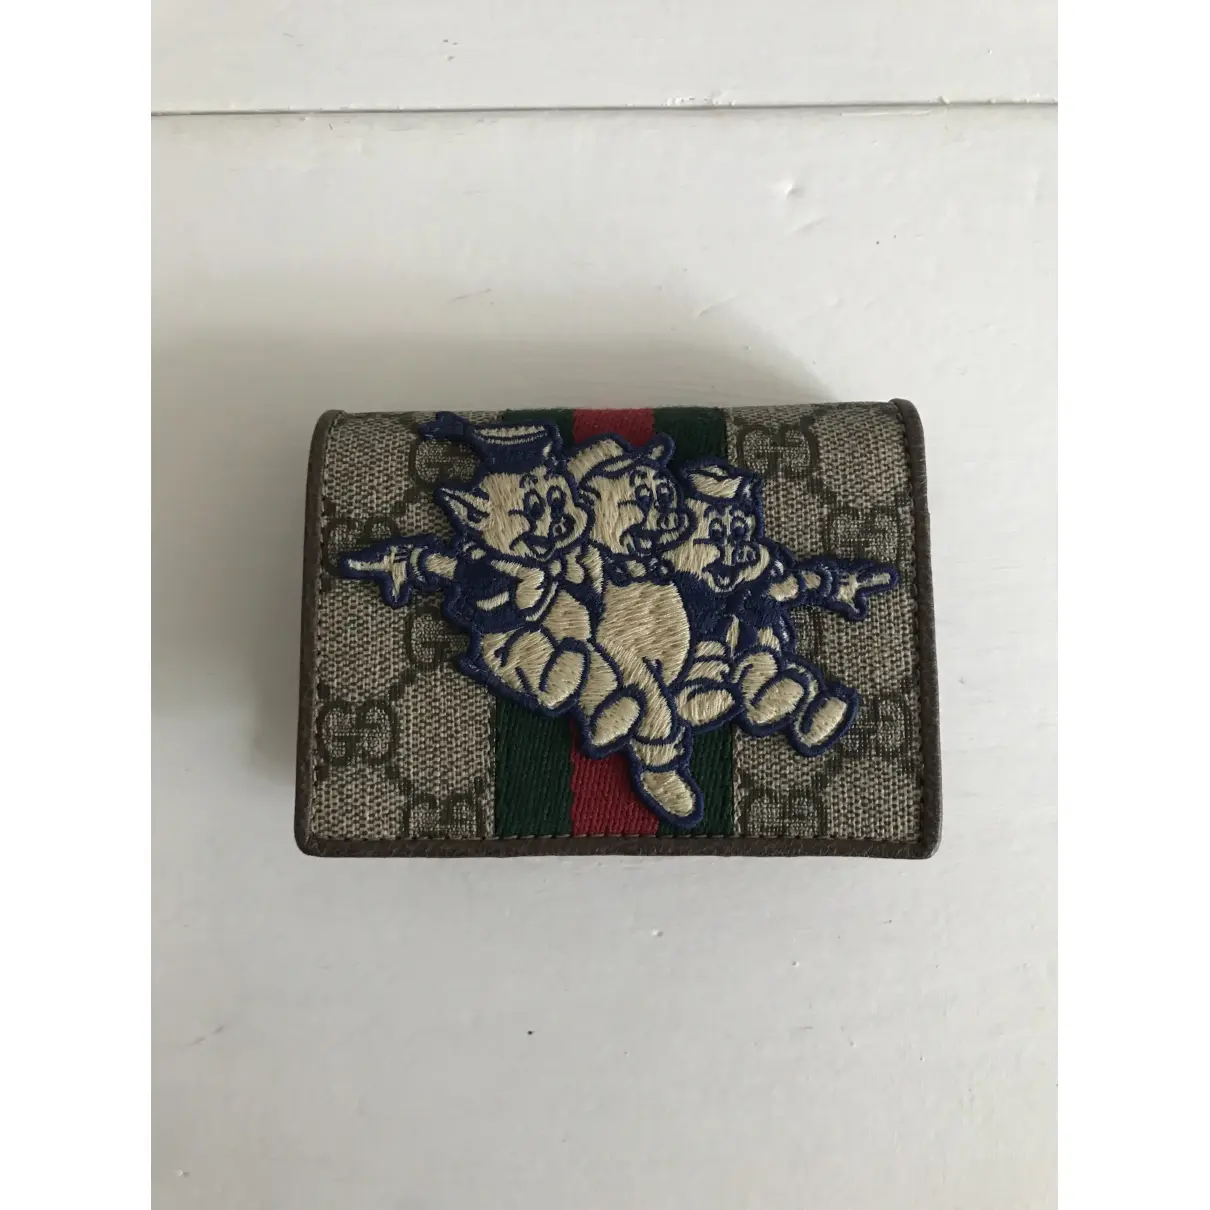 Buy Disney x Gucci Leather wallet online